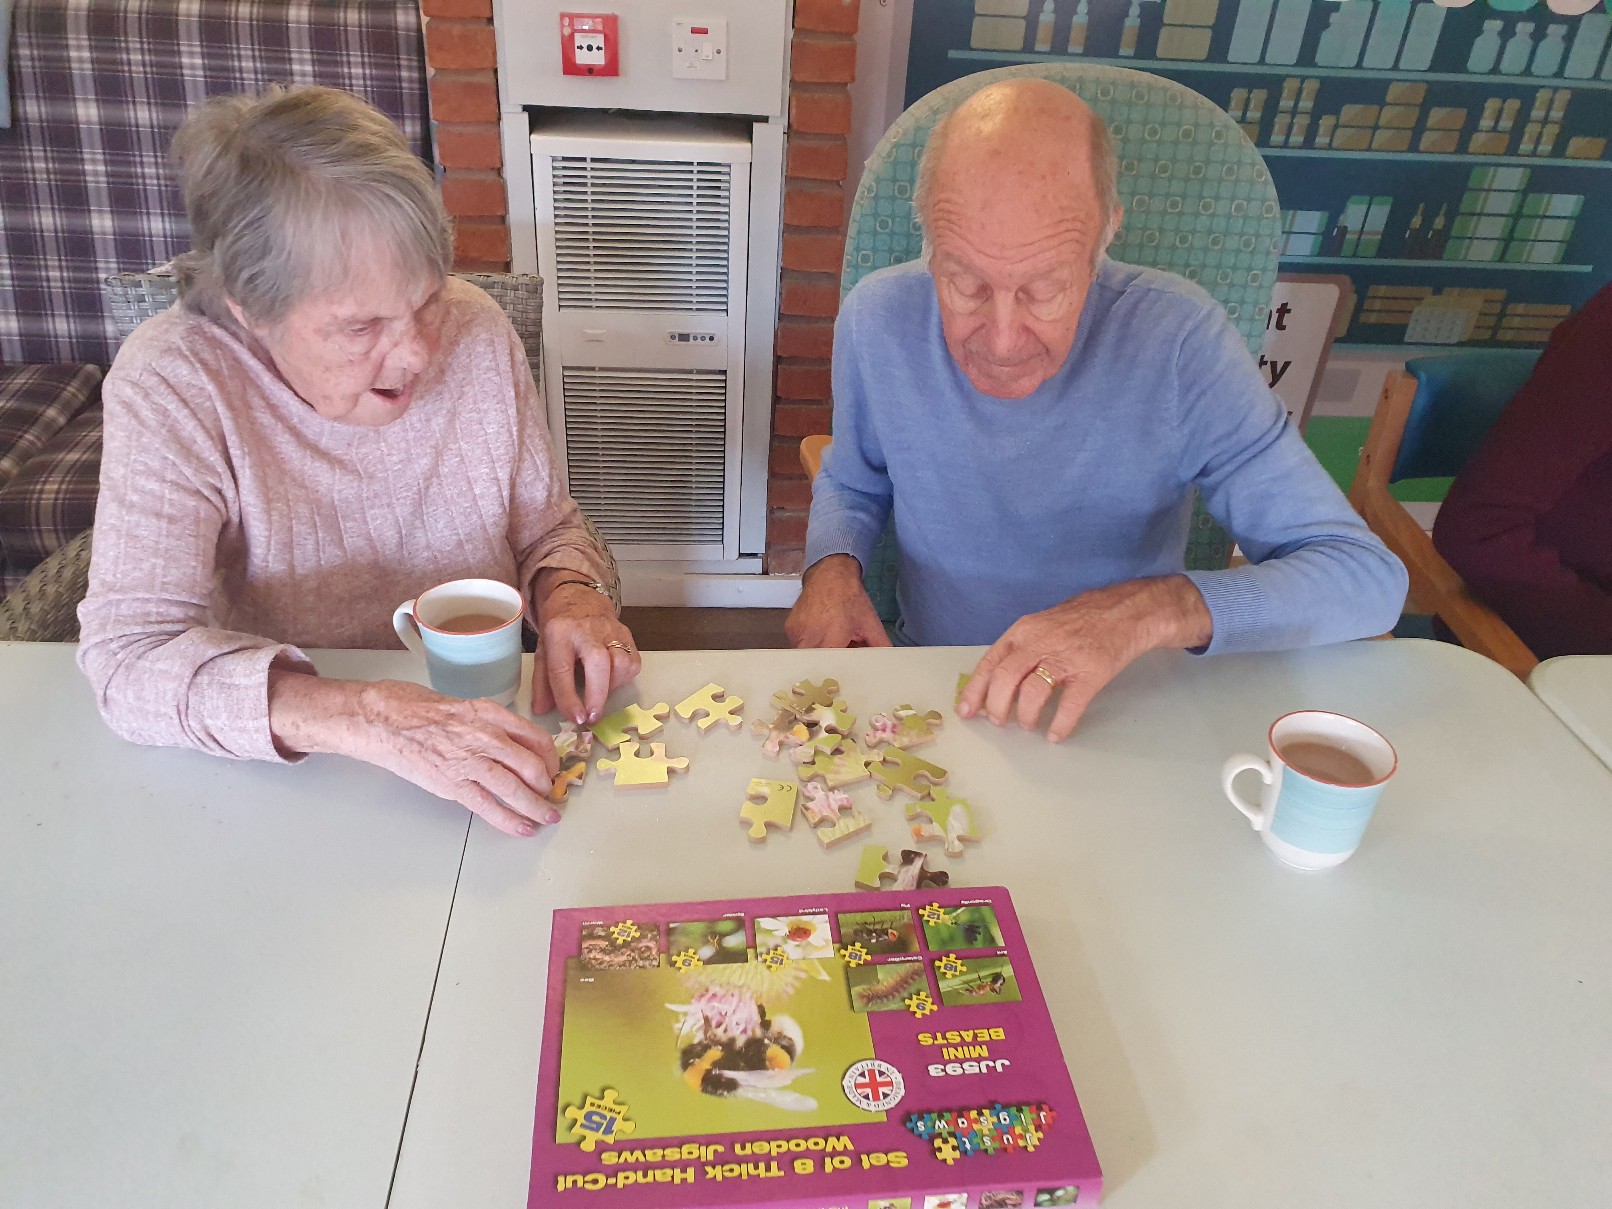 residnets enjoying a jig saw puzzle with their morning coffee